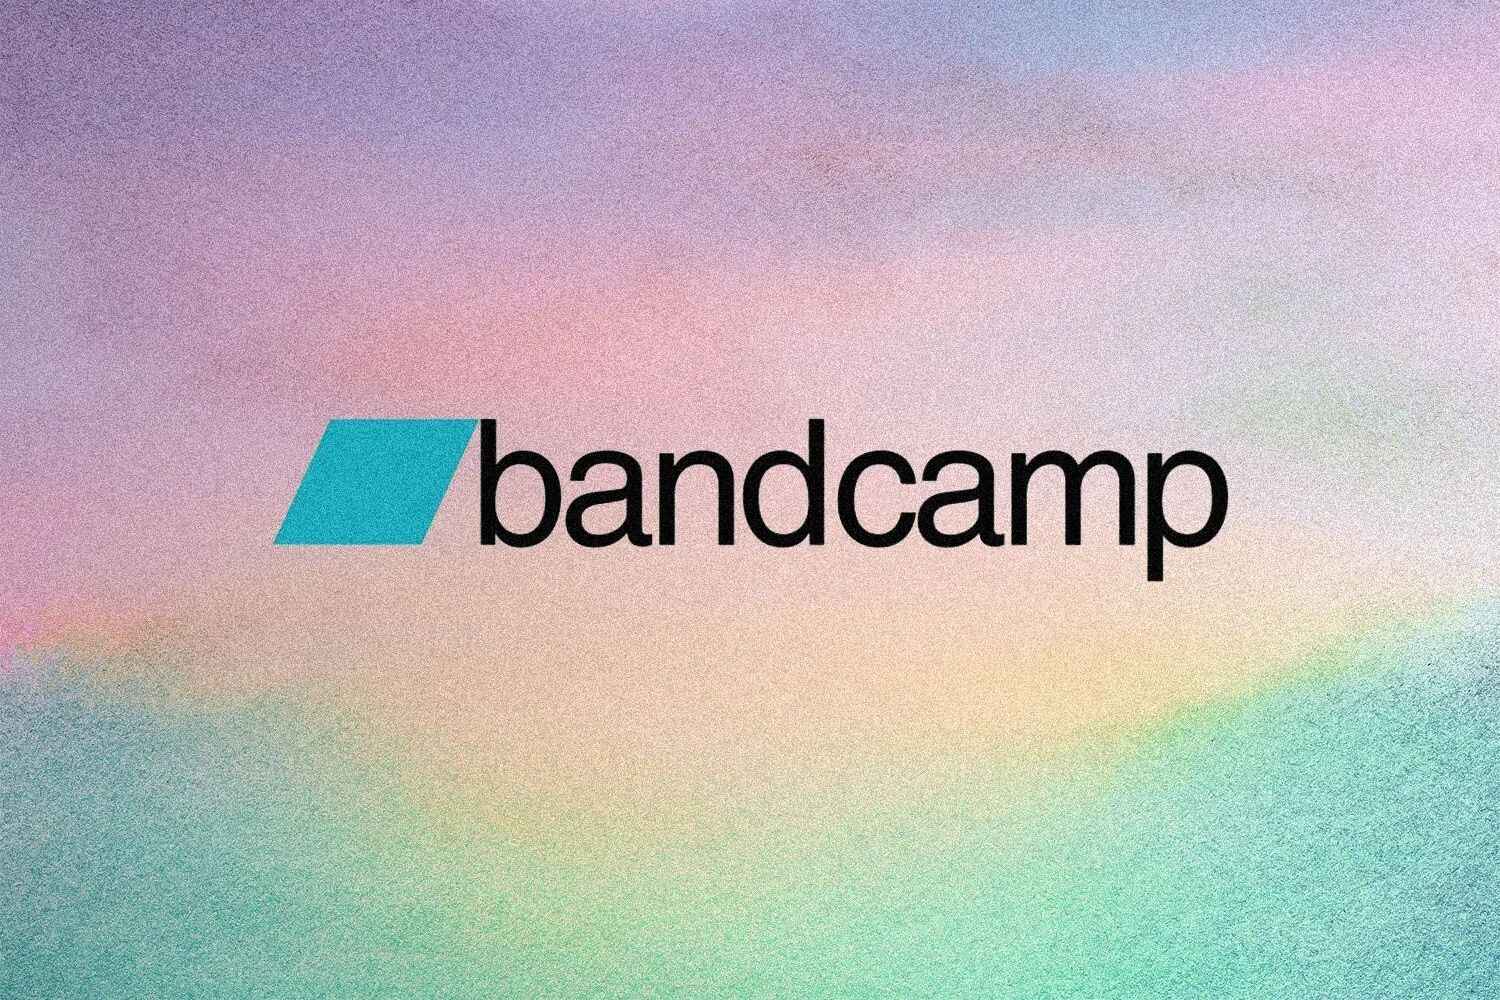 New Owner Of Bandcamp Lays Off 50% Of Employees